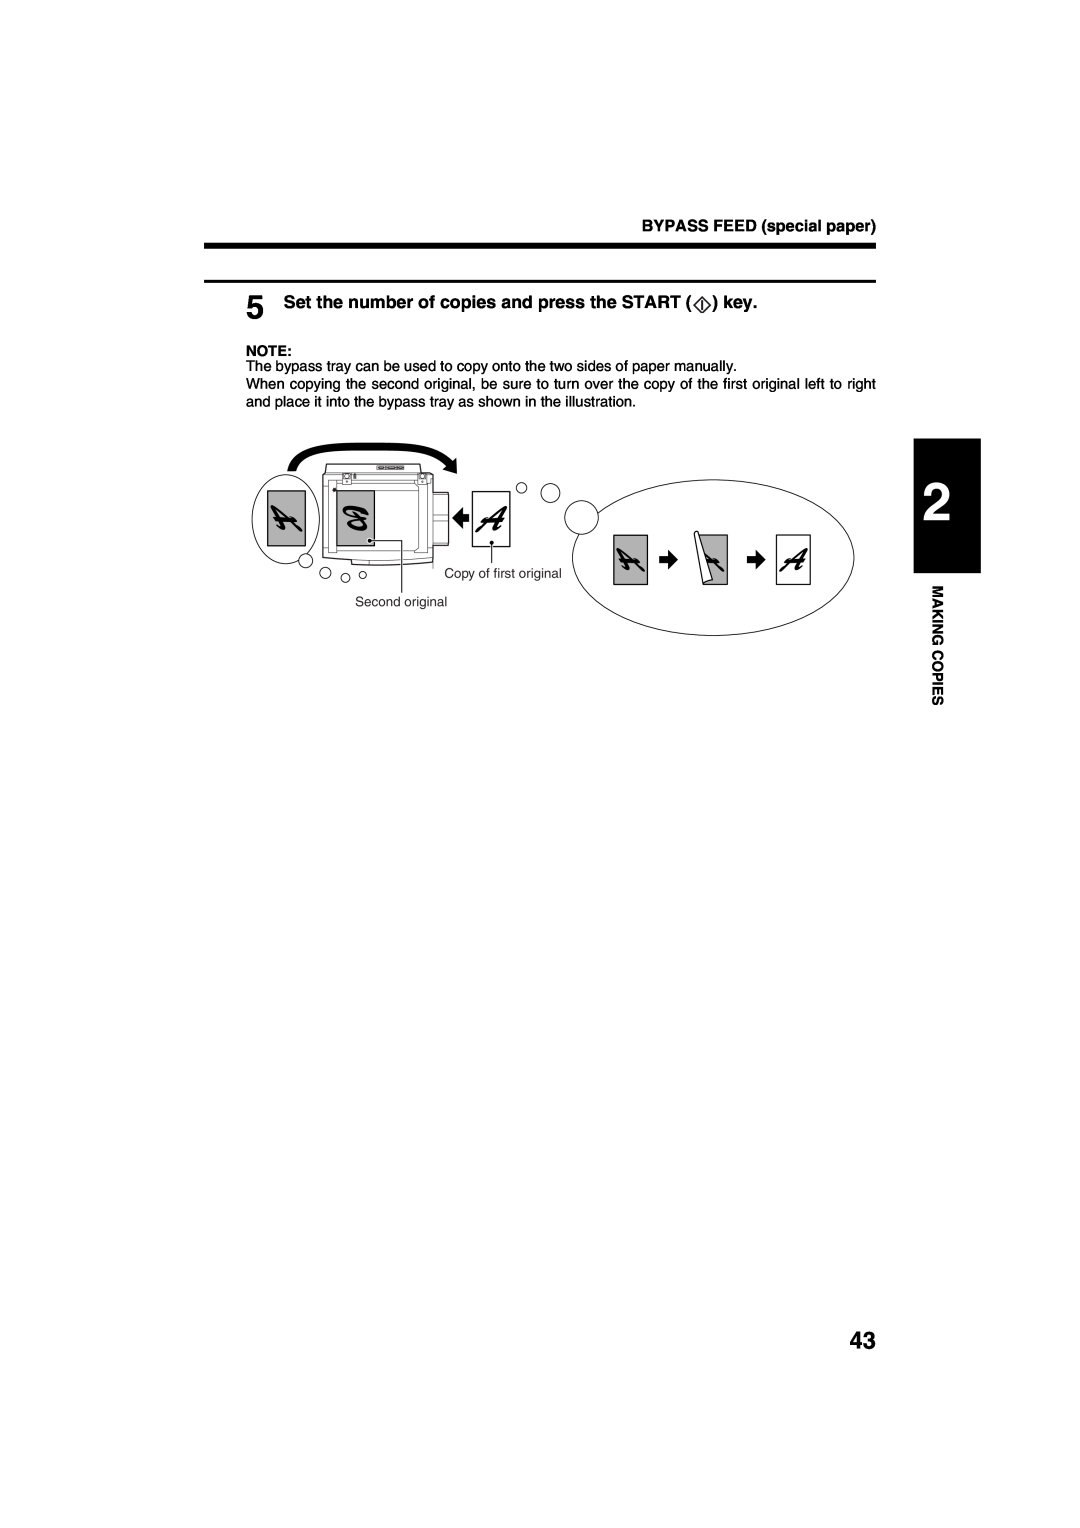 Sharp AR-M208 operation manual Set the number of copies and press the START key, BYPASS FEED special paper 